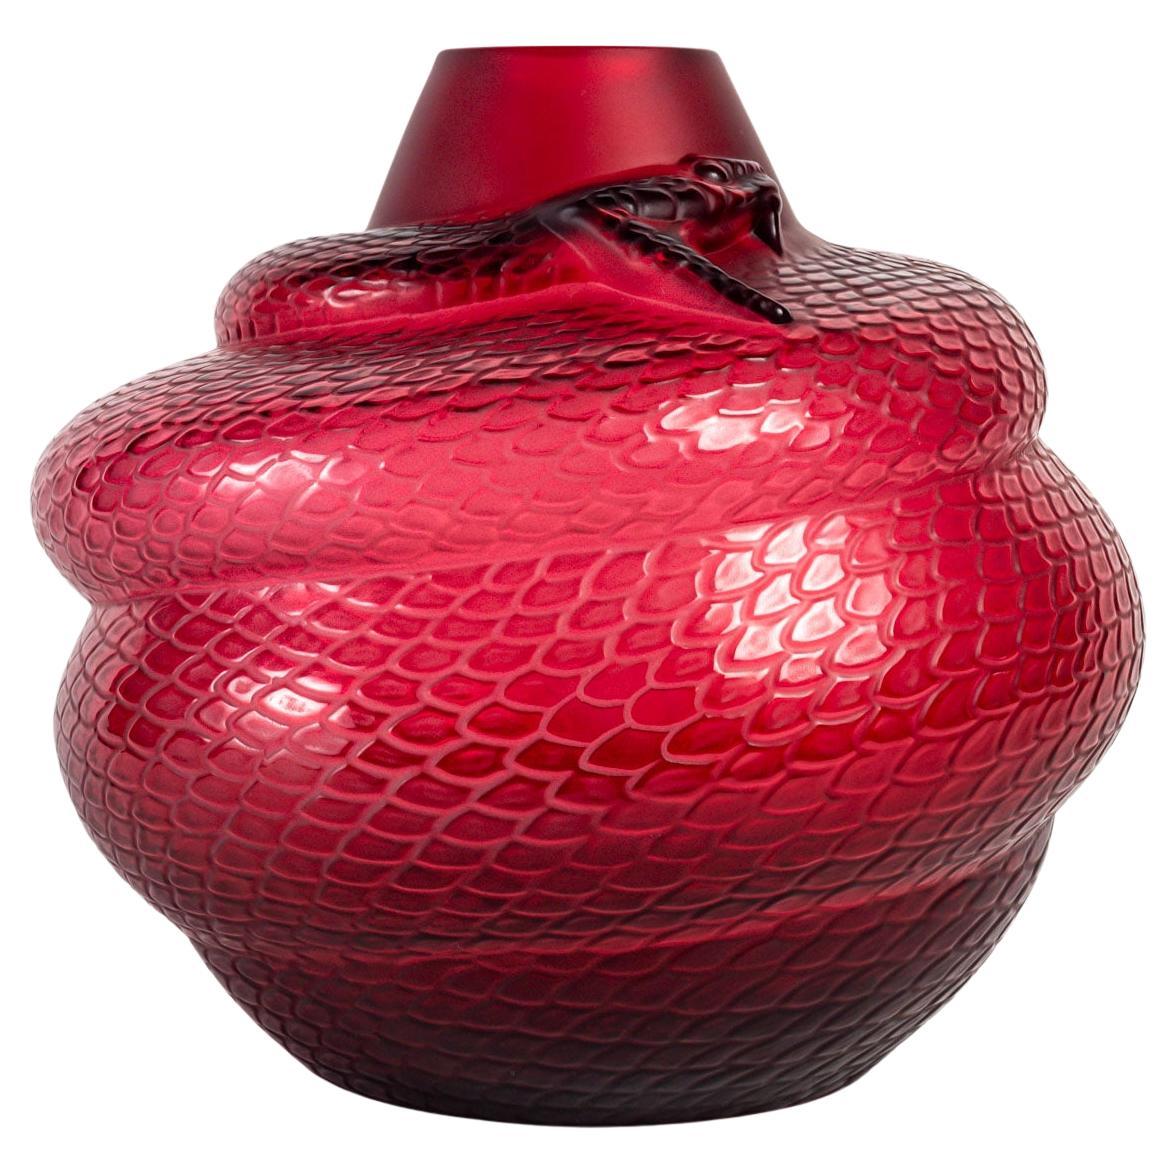 Lalique France - Vase Serpent Snake Red Crystal - New In Box